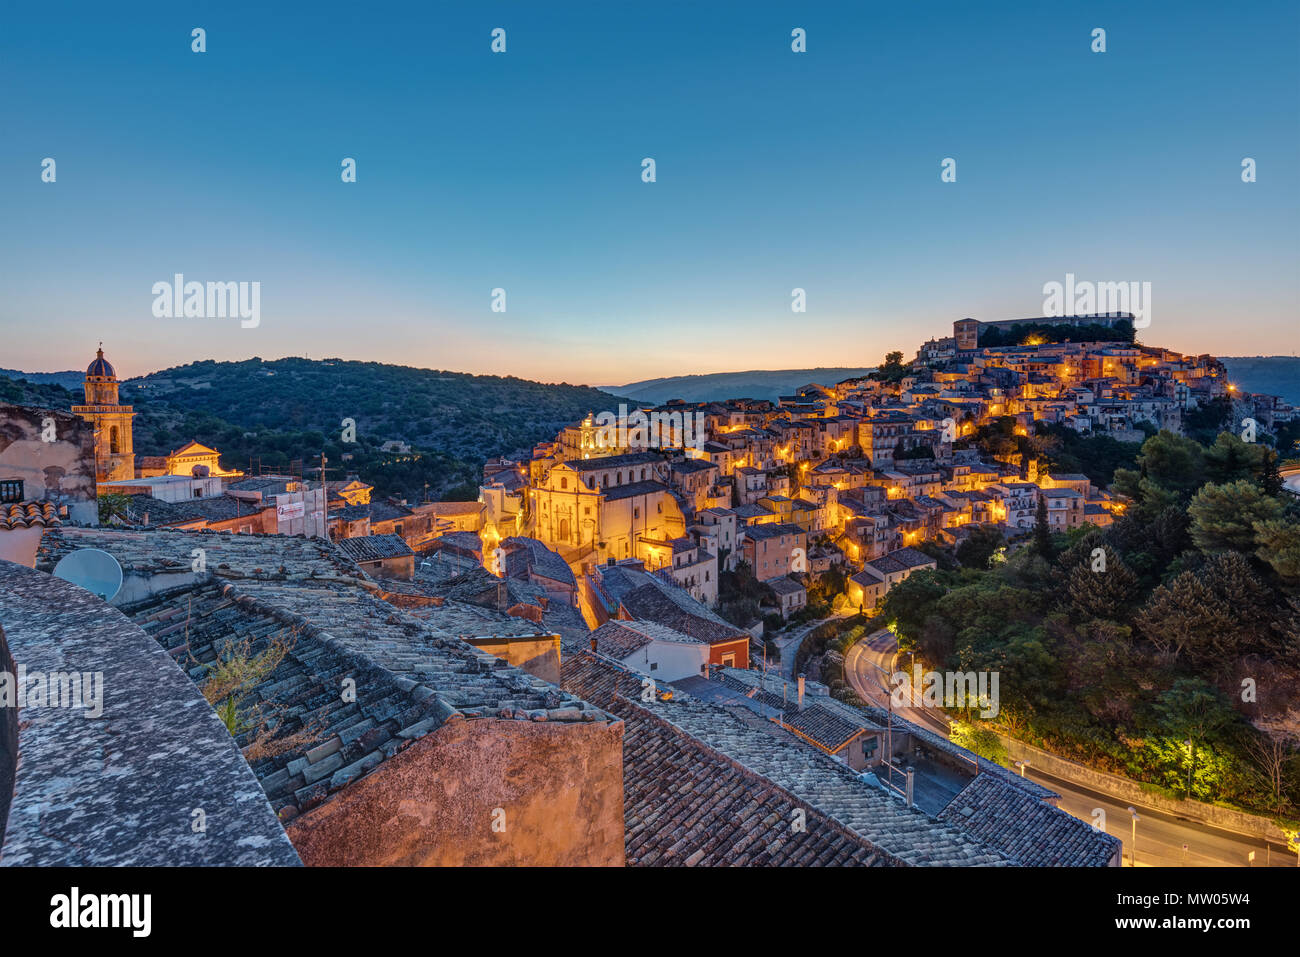 The old town of Ragusa Ibla in Sicily just before sunrise Stock Photo